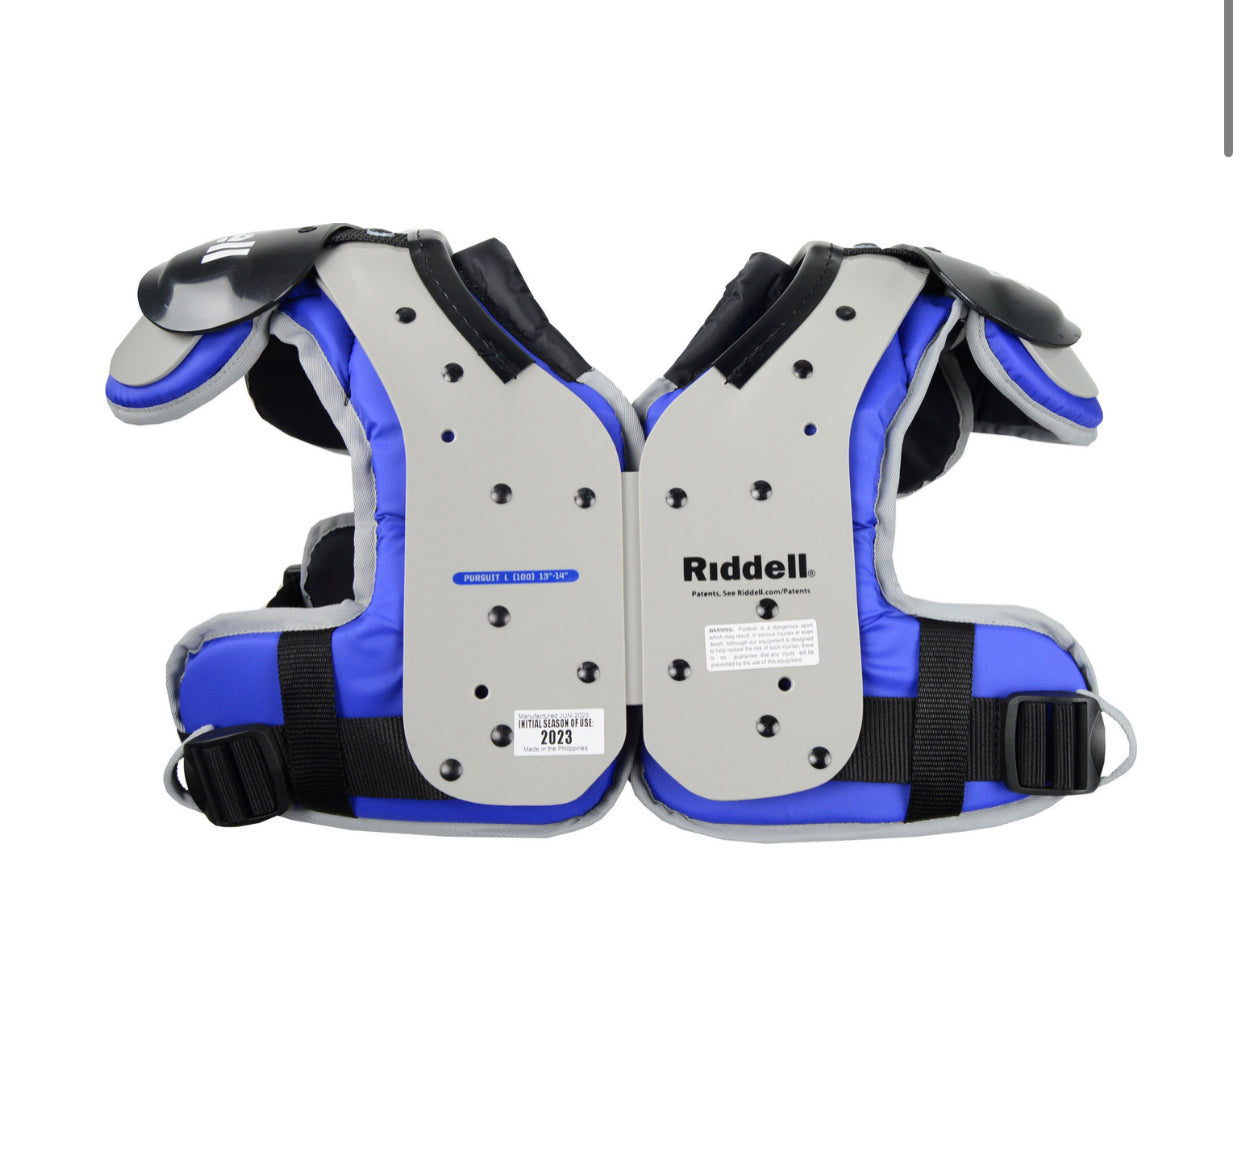 Riddell Pursuit Football Shoulder Pads - blue and gray